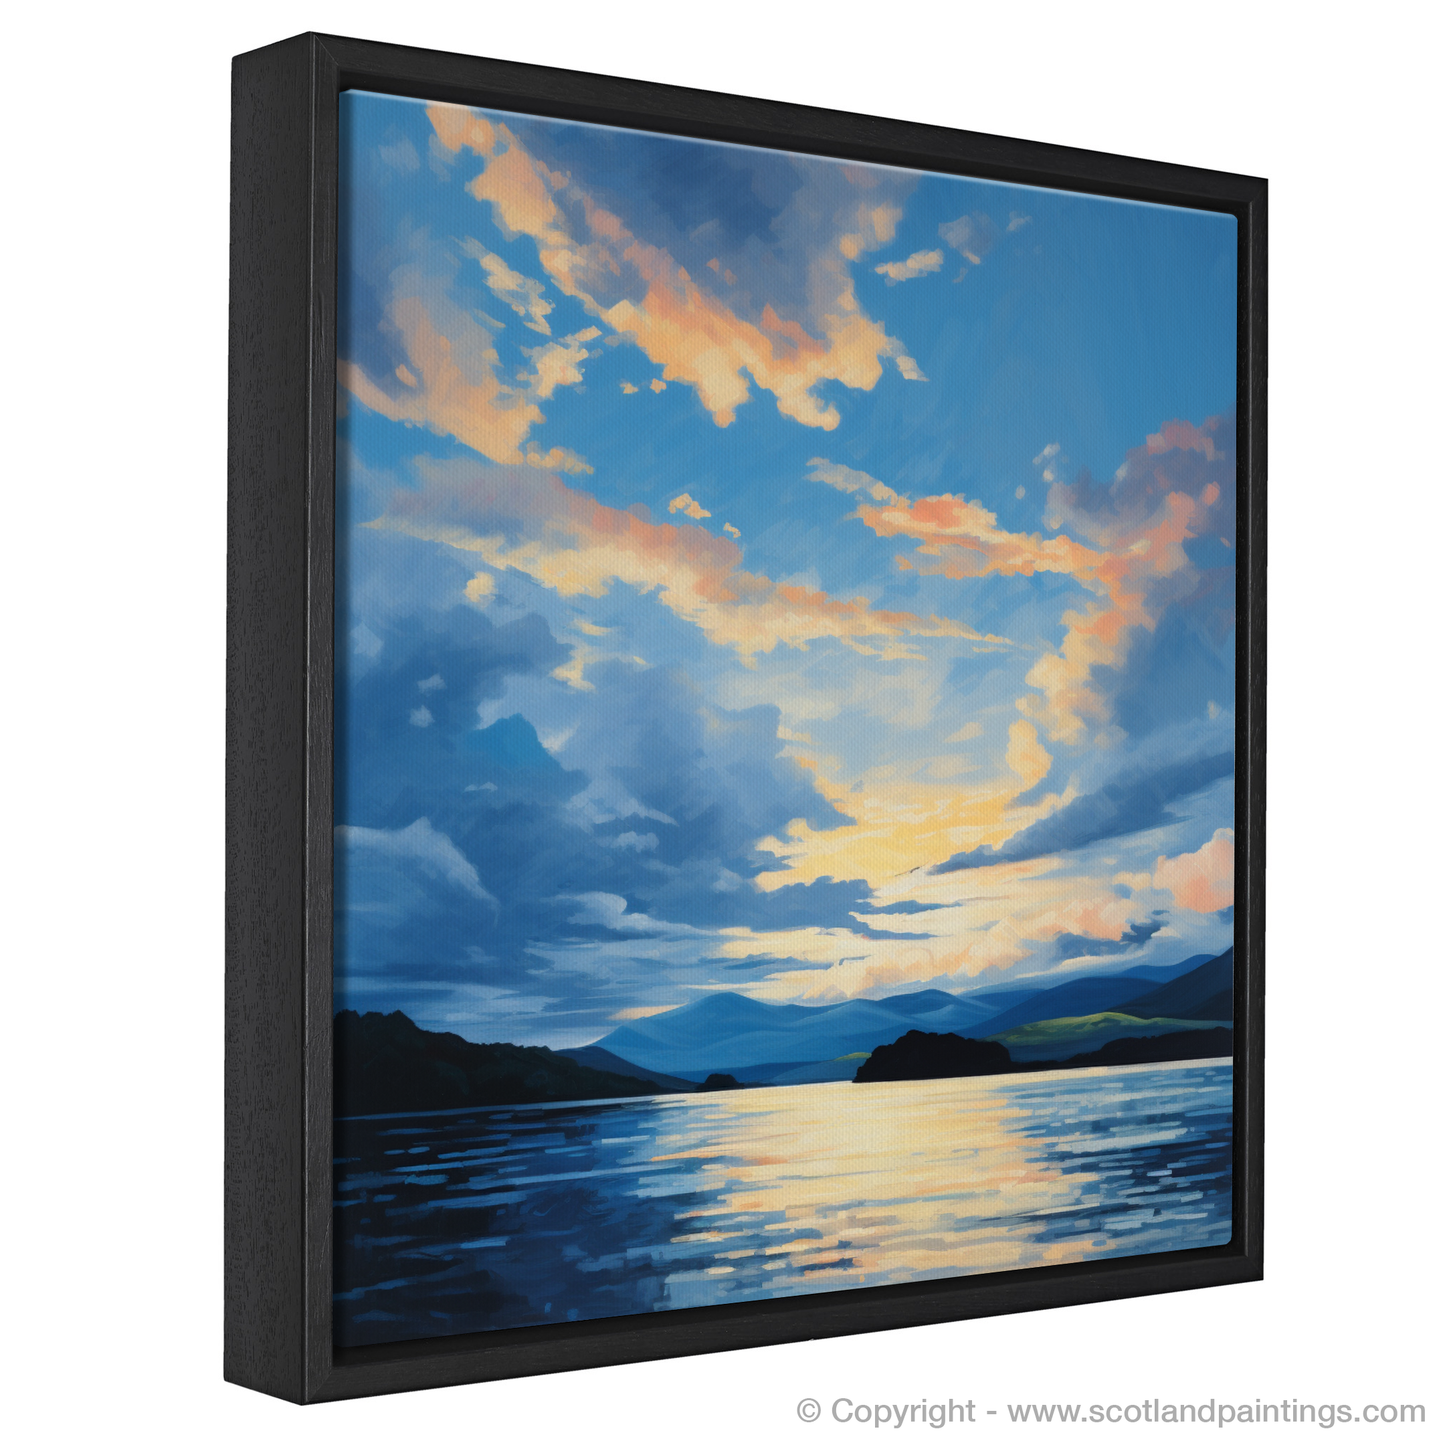 Painting and Art Print of A huge sky above Loch Lomond entitled "Majestic Skies above Loch Lomond".